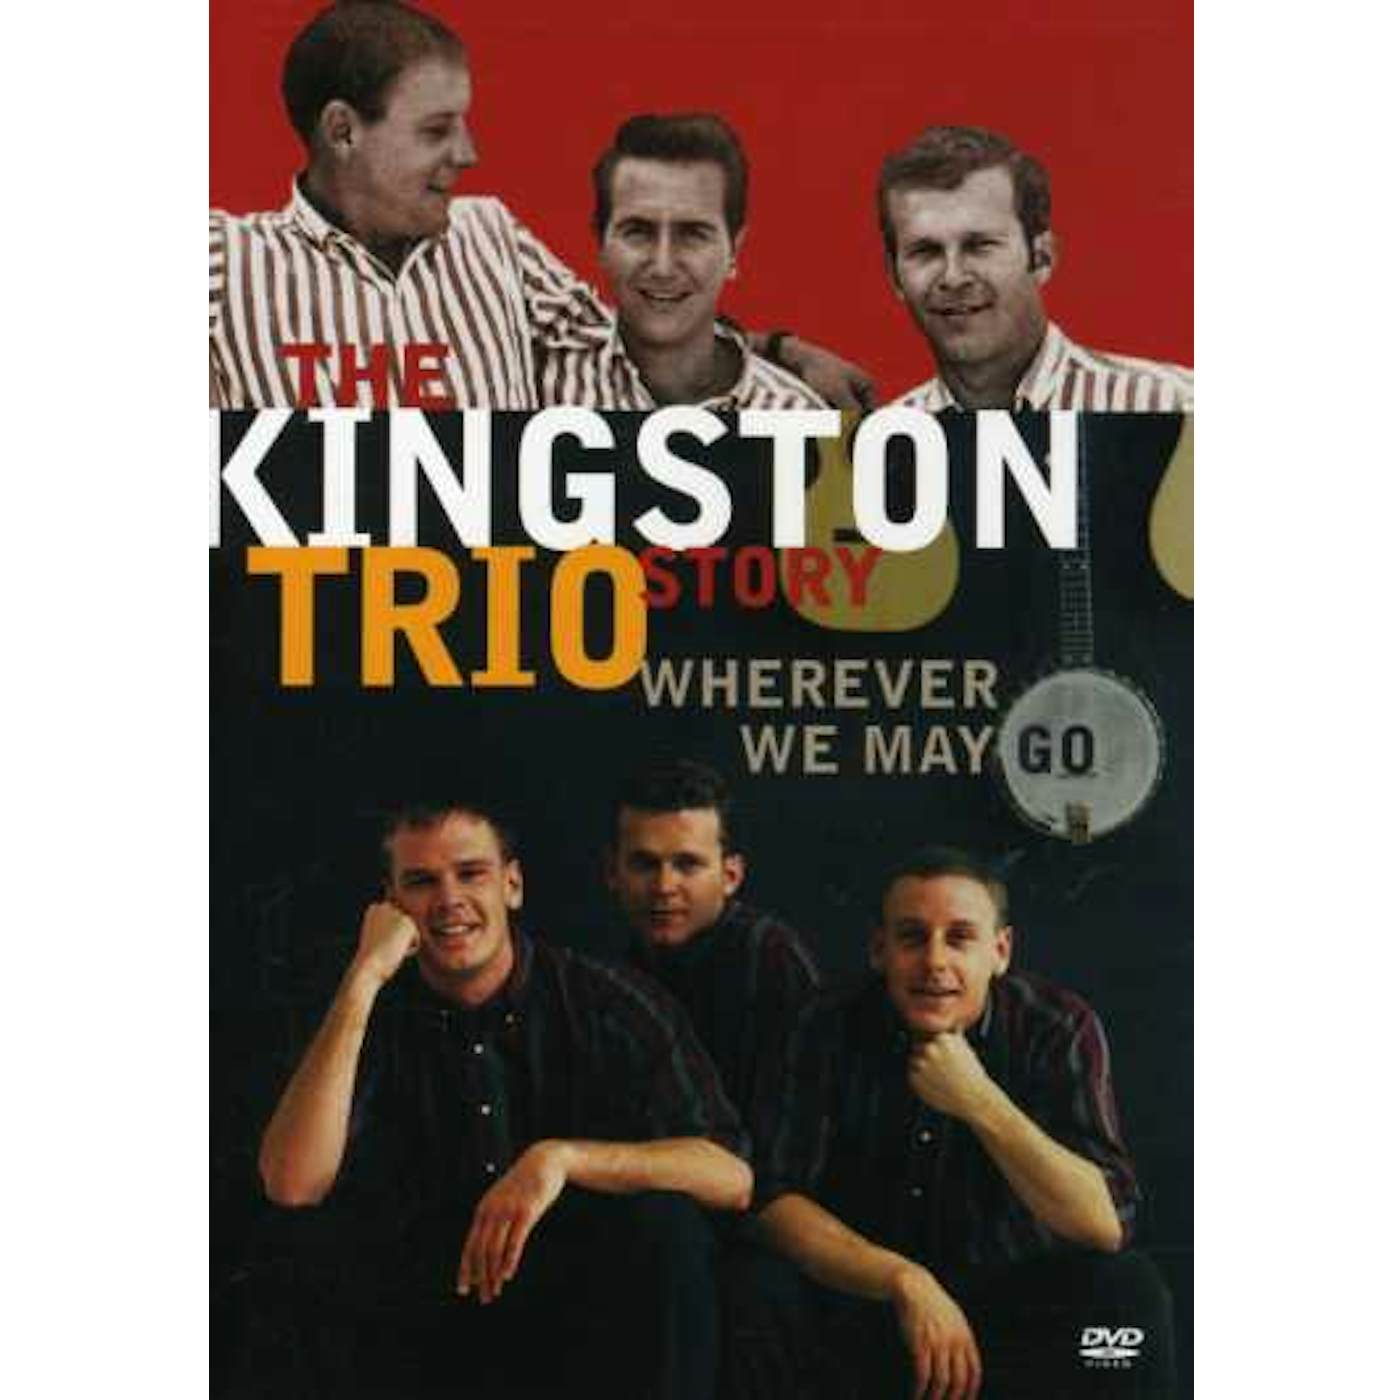 The Kingston Trio STORY: WHEREVER WE MAY GO DVD